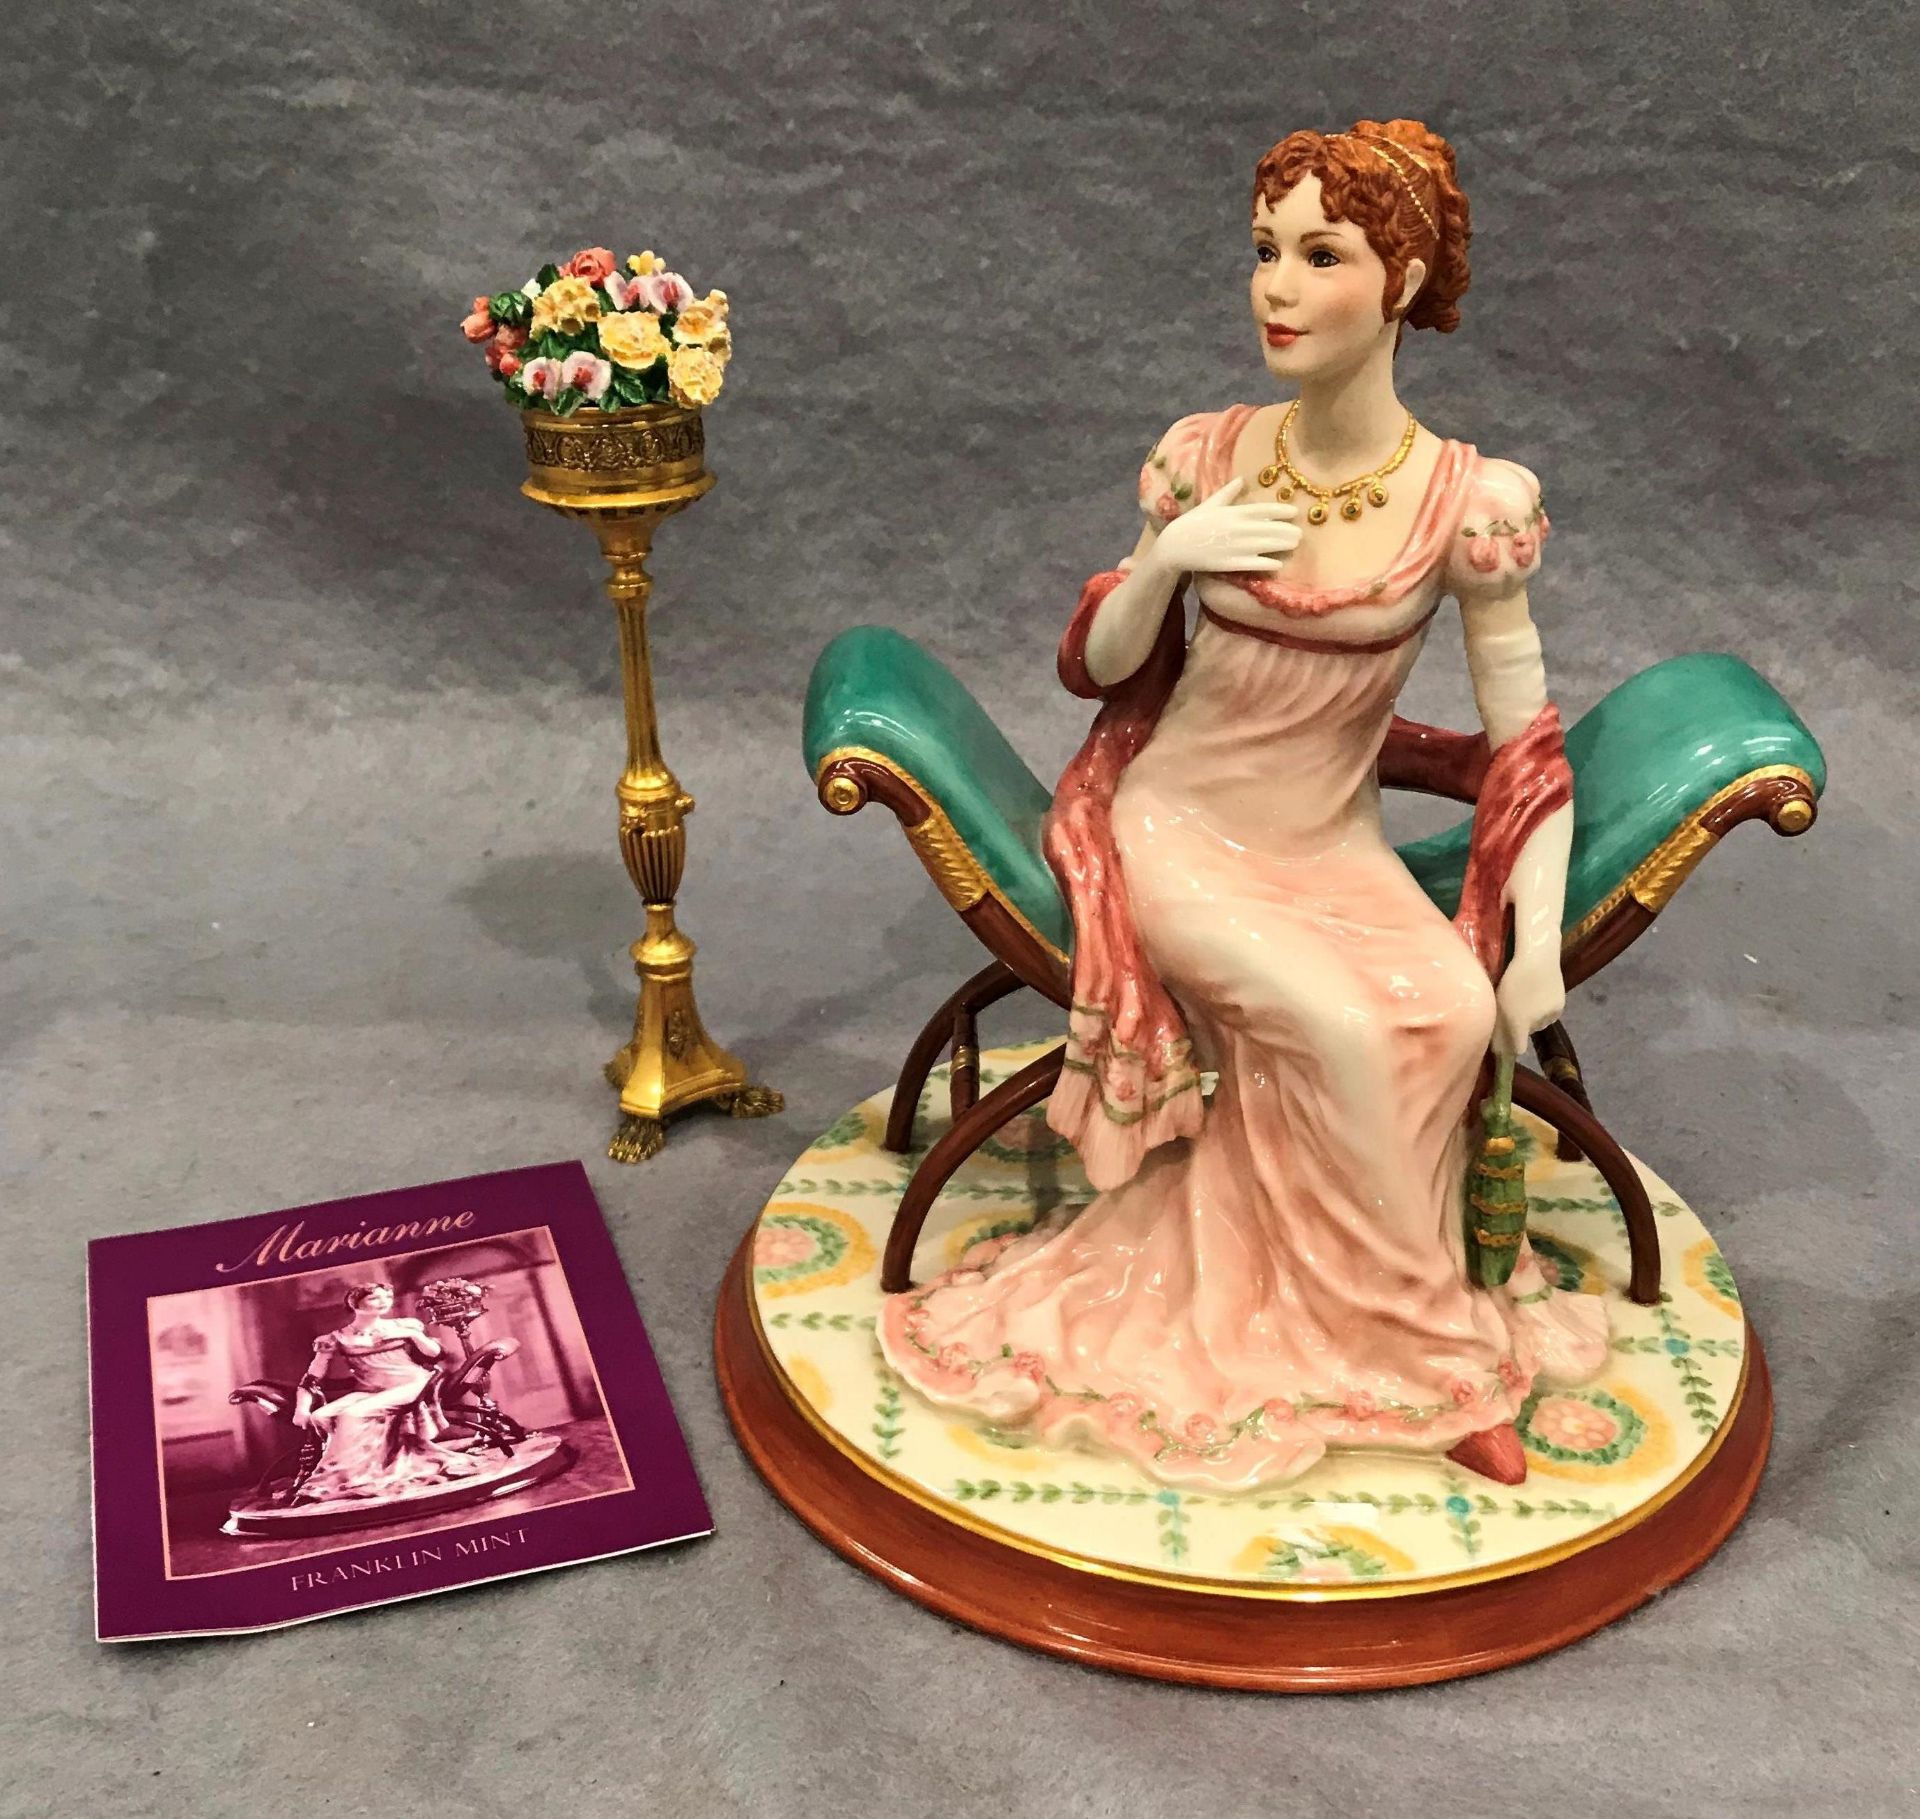 A Franklin Mint fine porcelain and hand painted Ltd Edition figurine Jane Austen's Marianne from